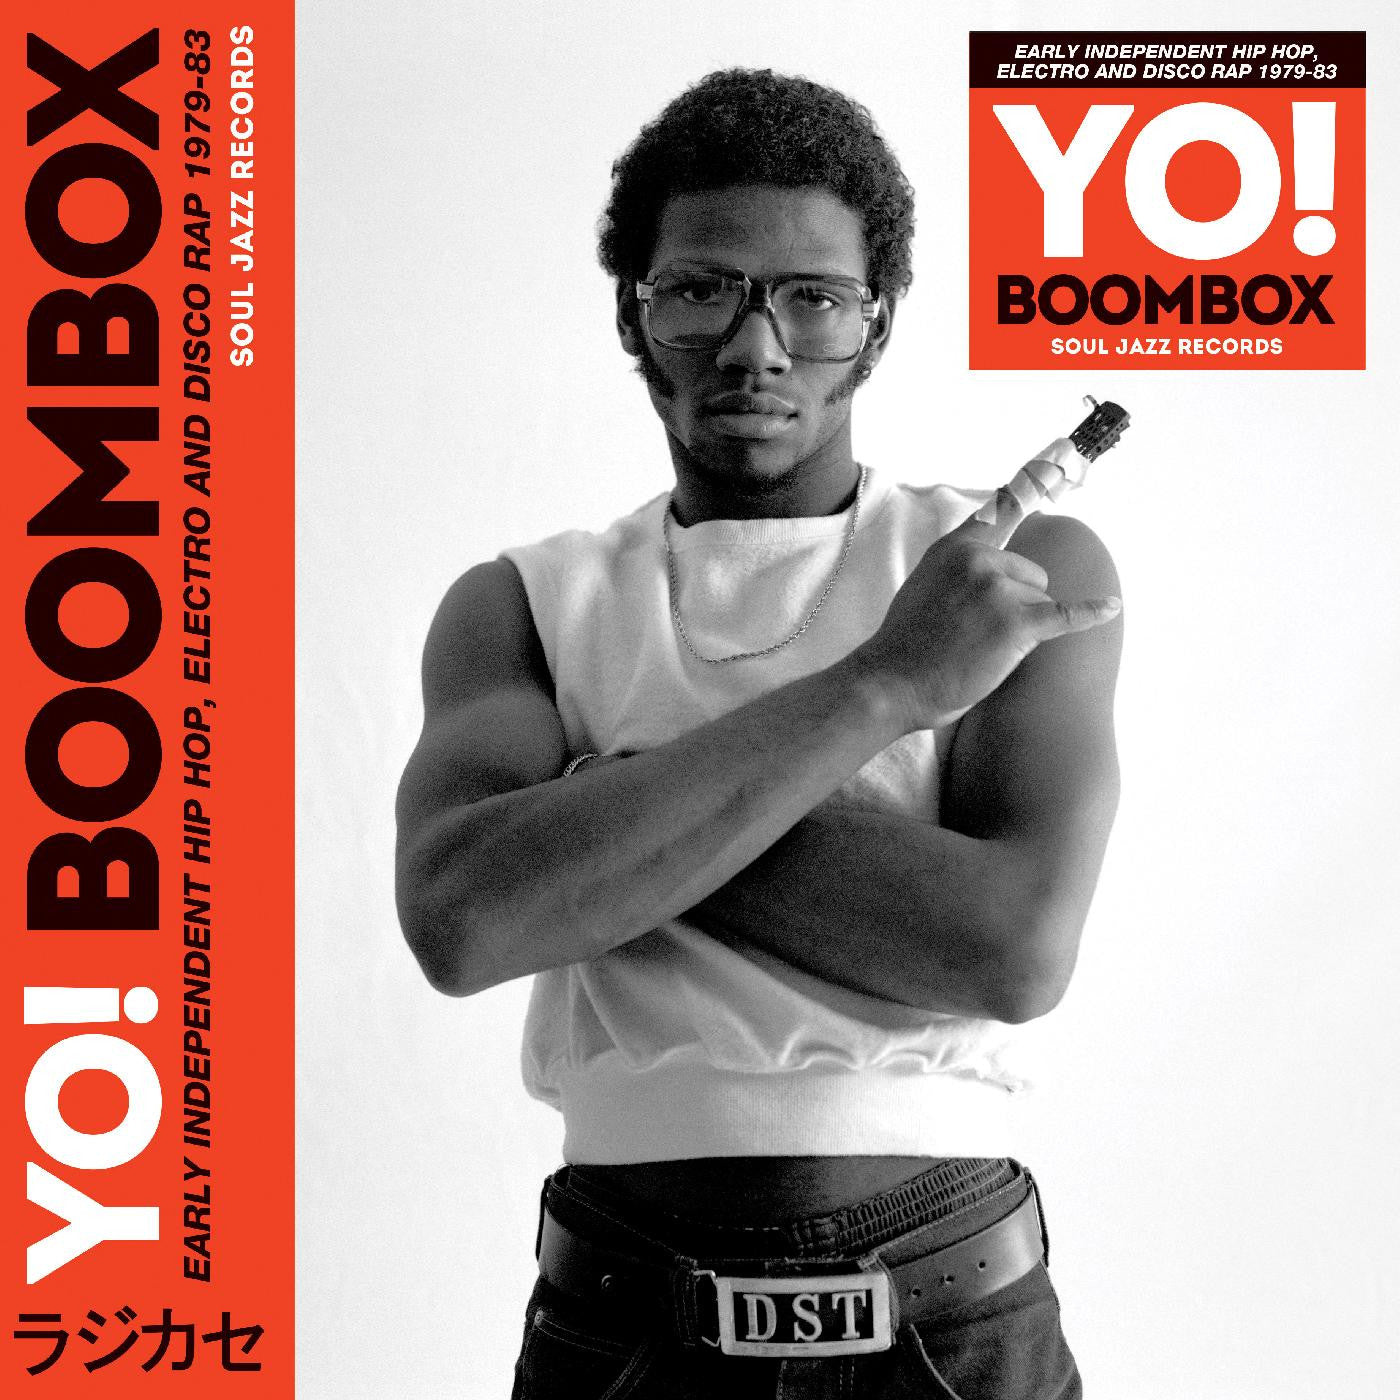 Various - Soul Jazz Records presents: YO! BOOMBOX - Early Independent Hip Hop, Electro And Disco Rap 1979-83 [Indie-Exclusive]